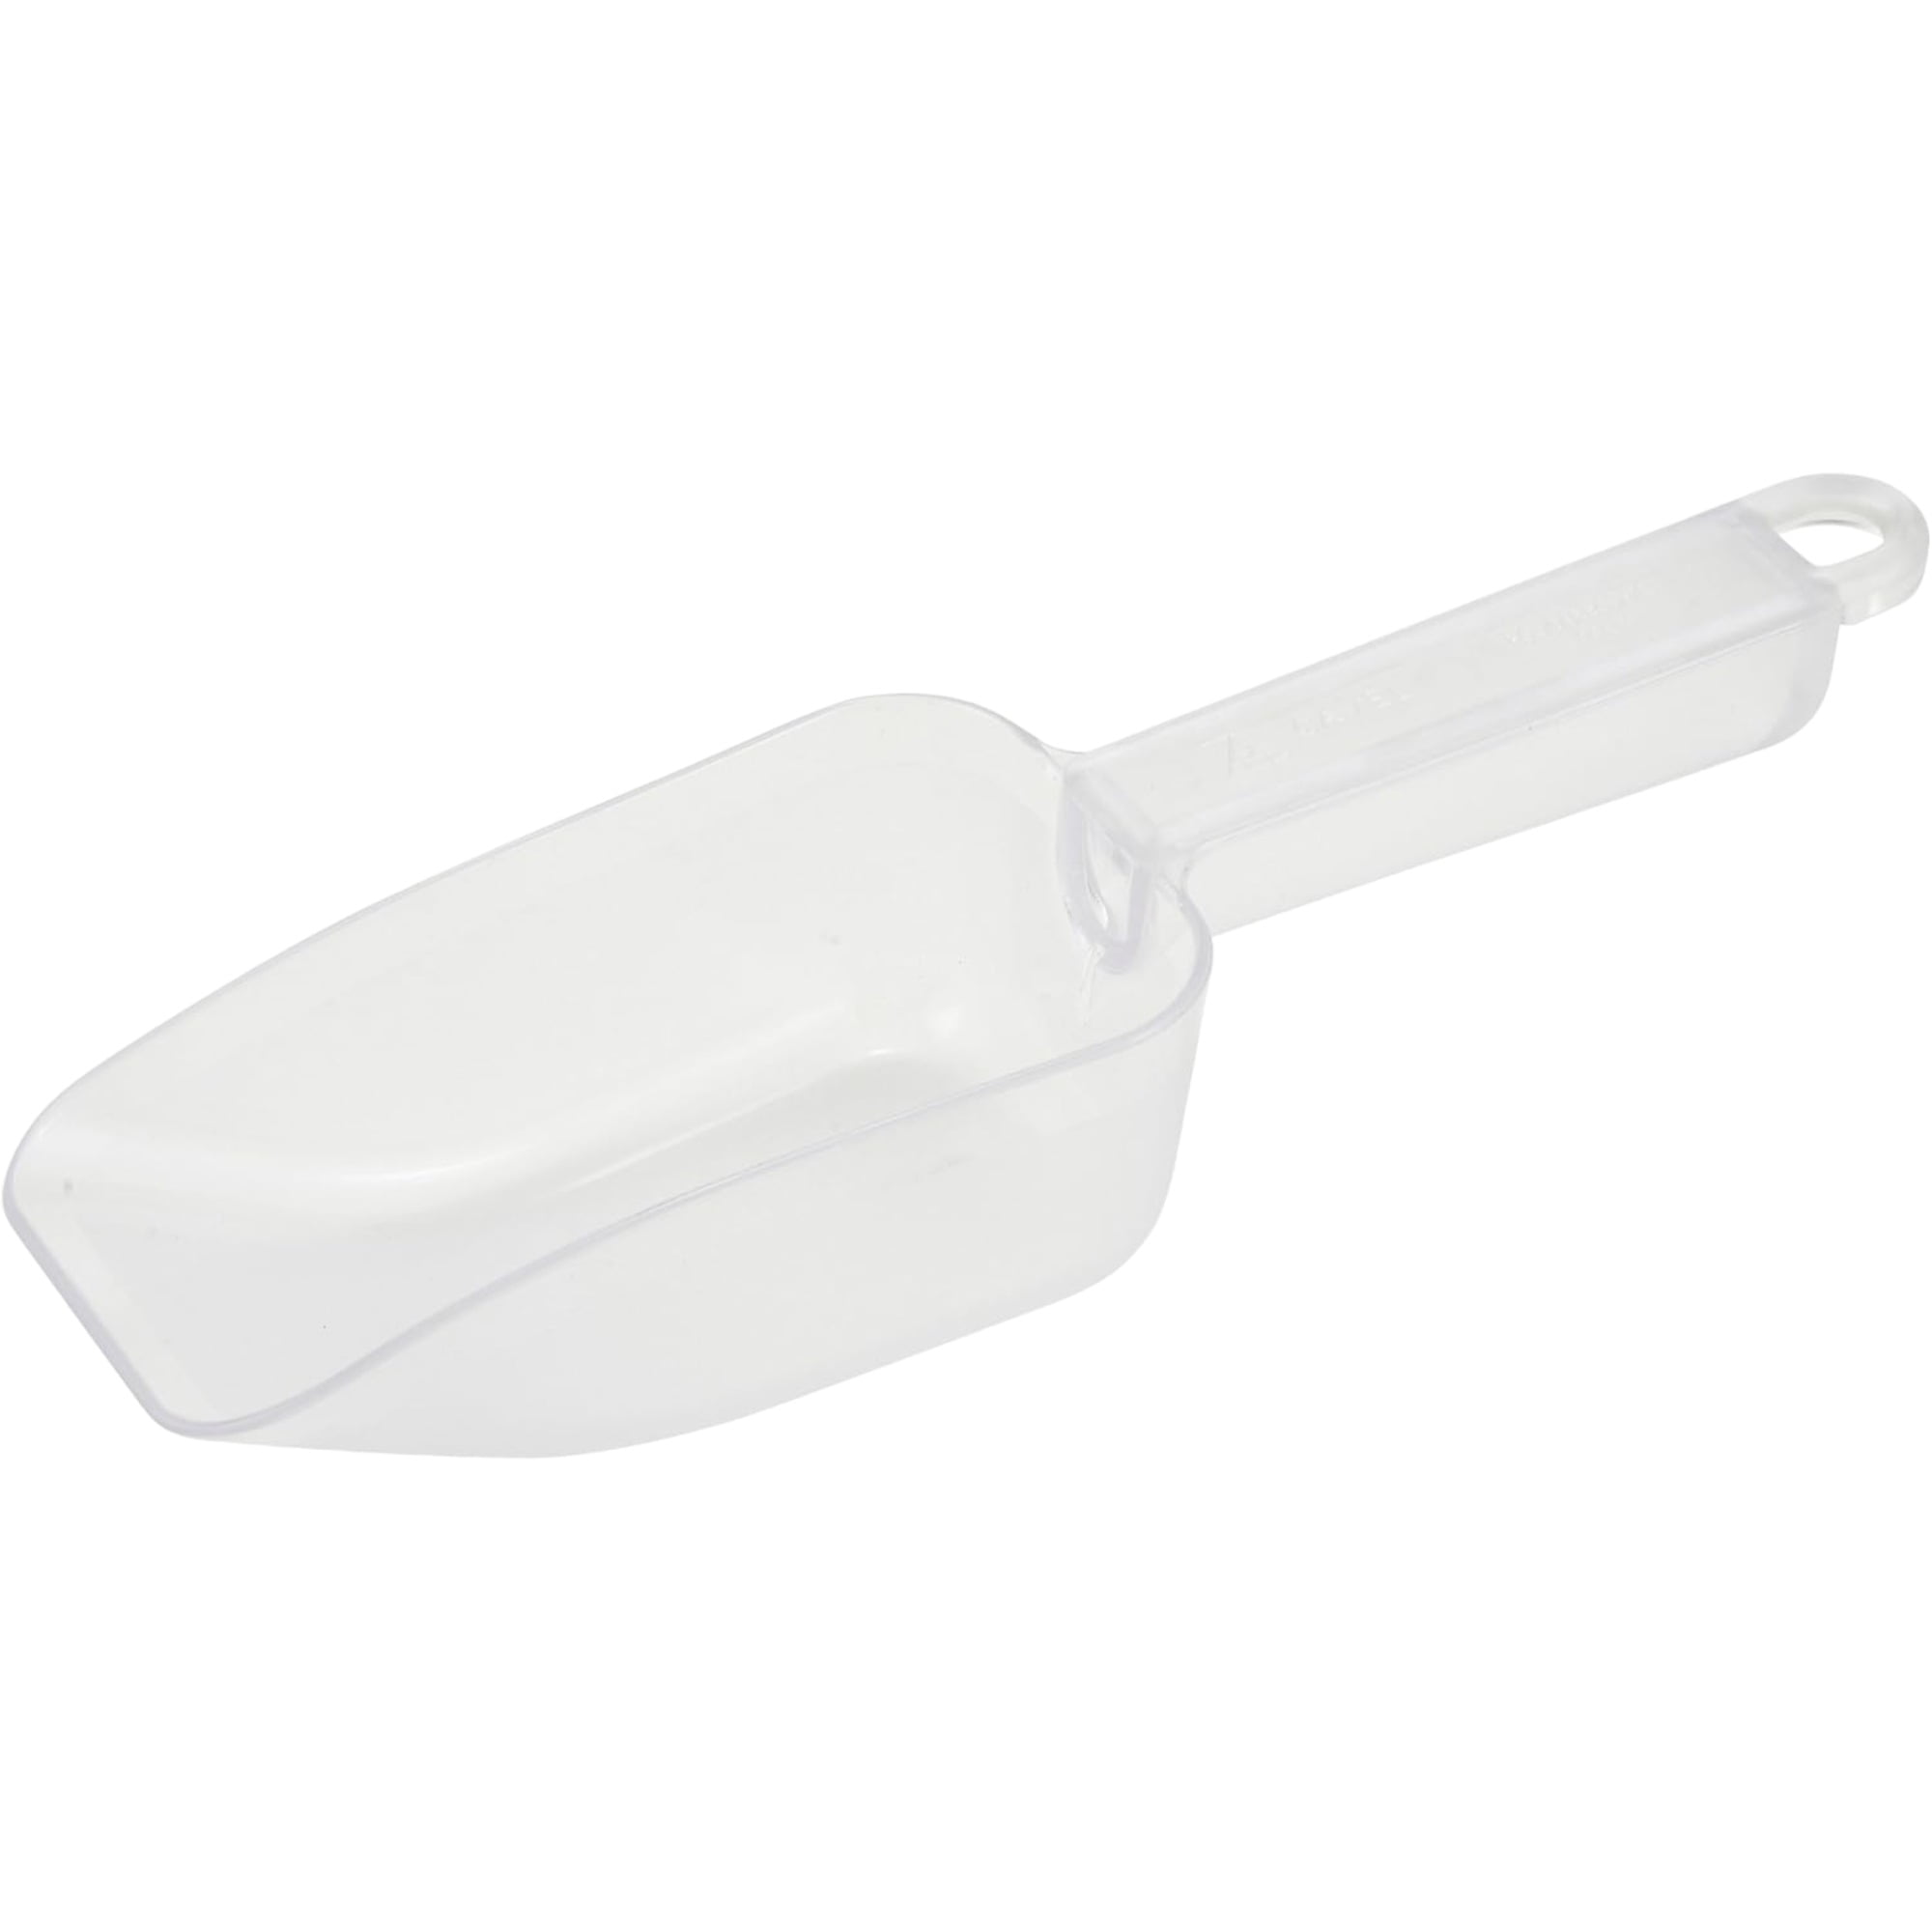  Winco Aluminum Utility Scoop, 24-Ounce, Medium: Commercial Food  Scoops: Home & Kitchen